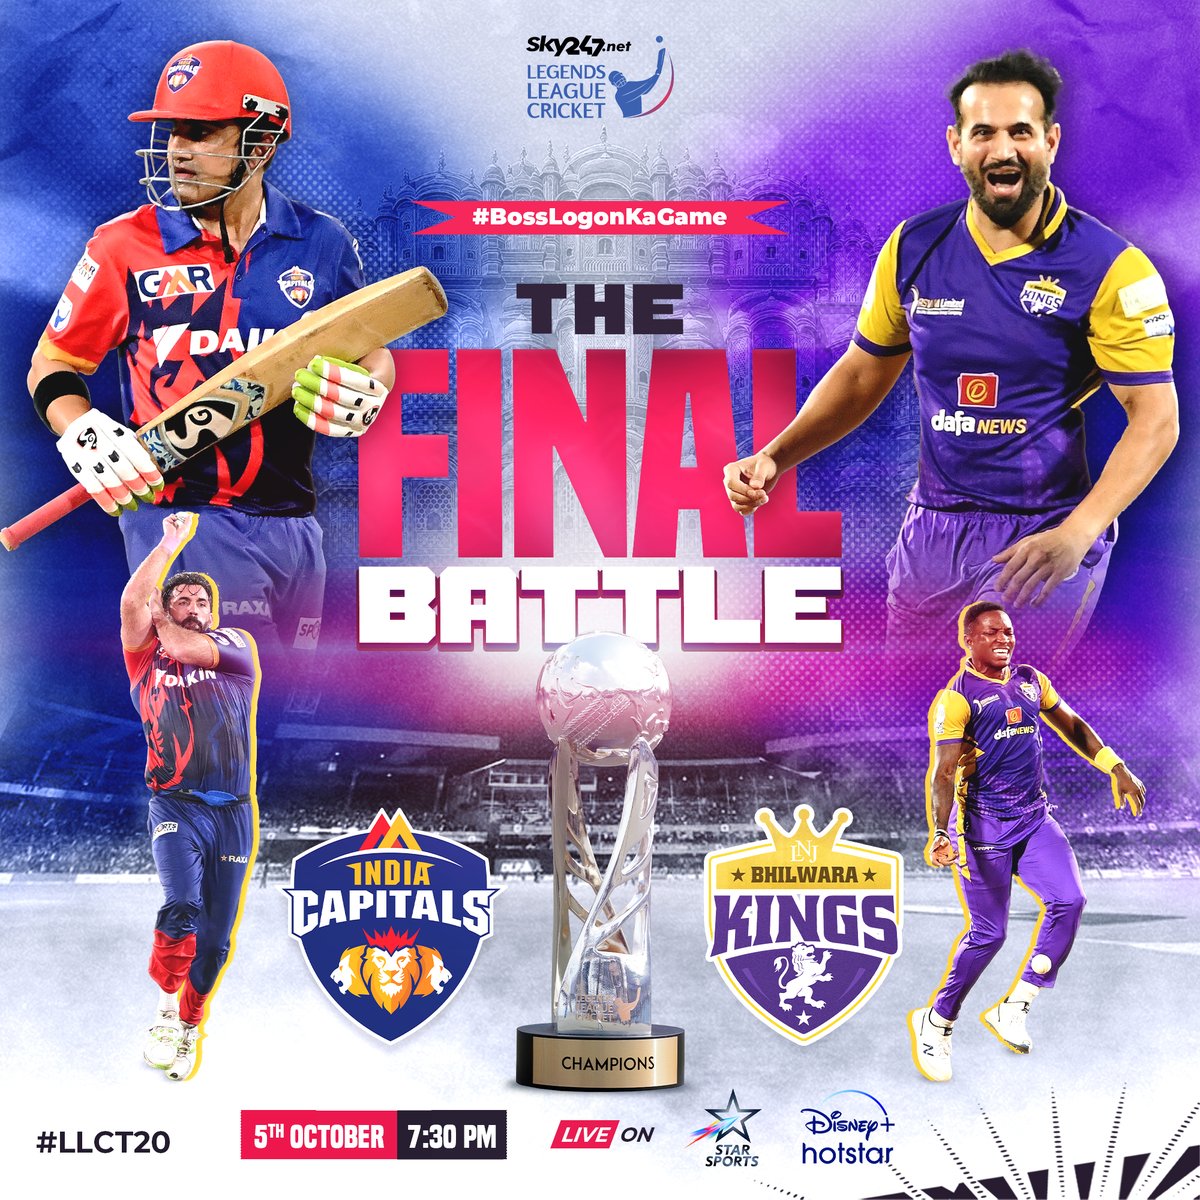 The countdown has begun! 1 day to go for the FINAL battle of #LLCT20. It’s @CapitalsIndia vs @Bhilwarakings. Which team will come out as the ultimate winner? Watch live on @StarSportsIndia/@DisneyPlusHS /@FanCode. Tickets on @bookmyshow. #BossLogonKaGame #LegendsLeagueCricket